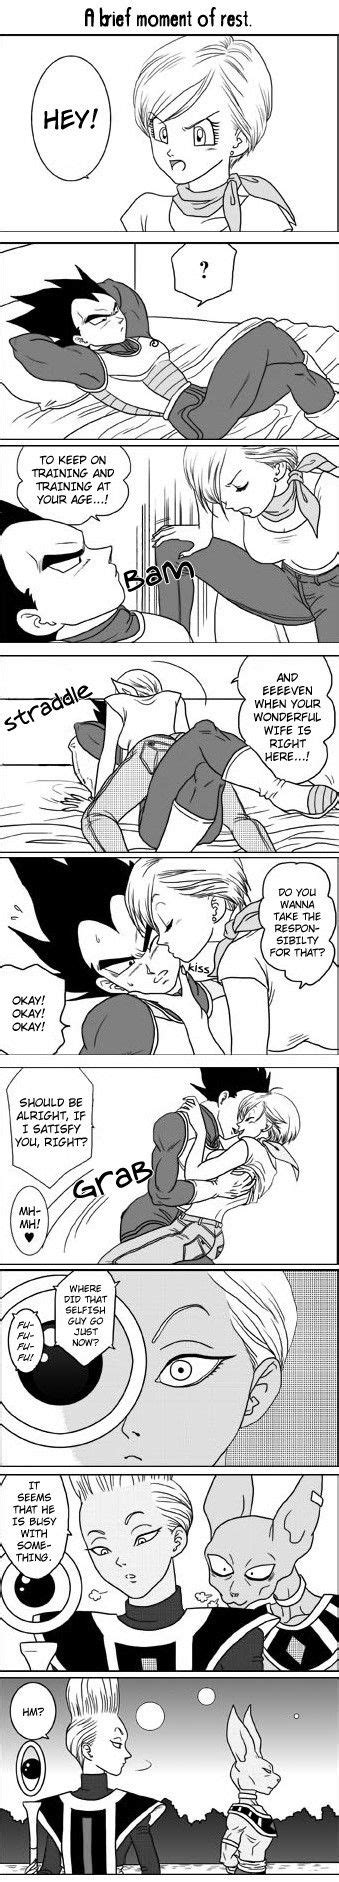 219 Best Images About Dragon Ball On Pinterest More